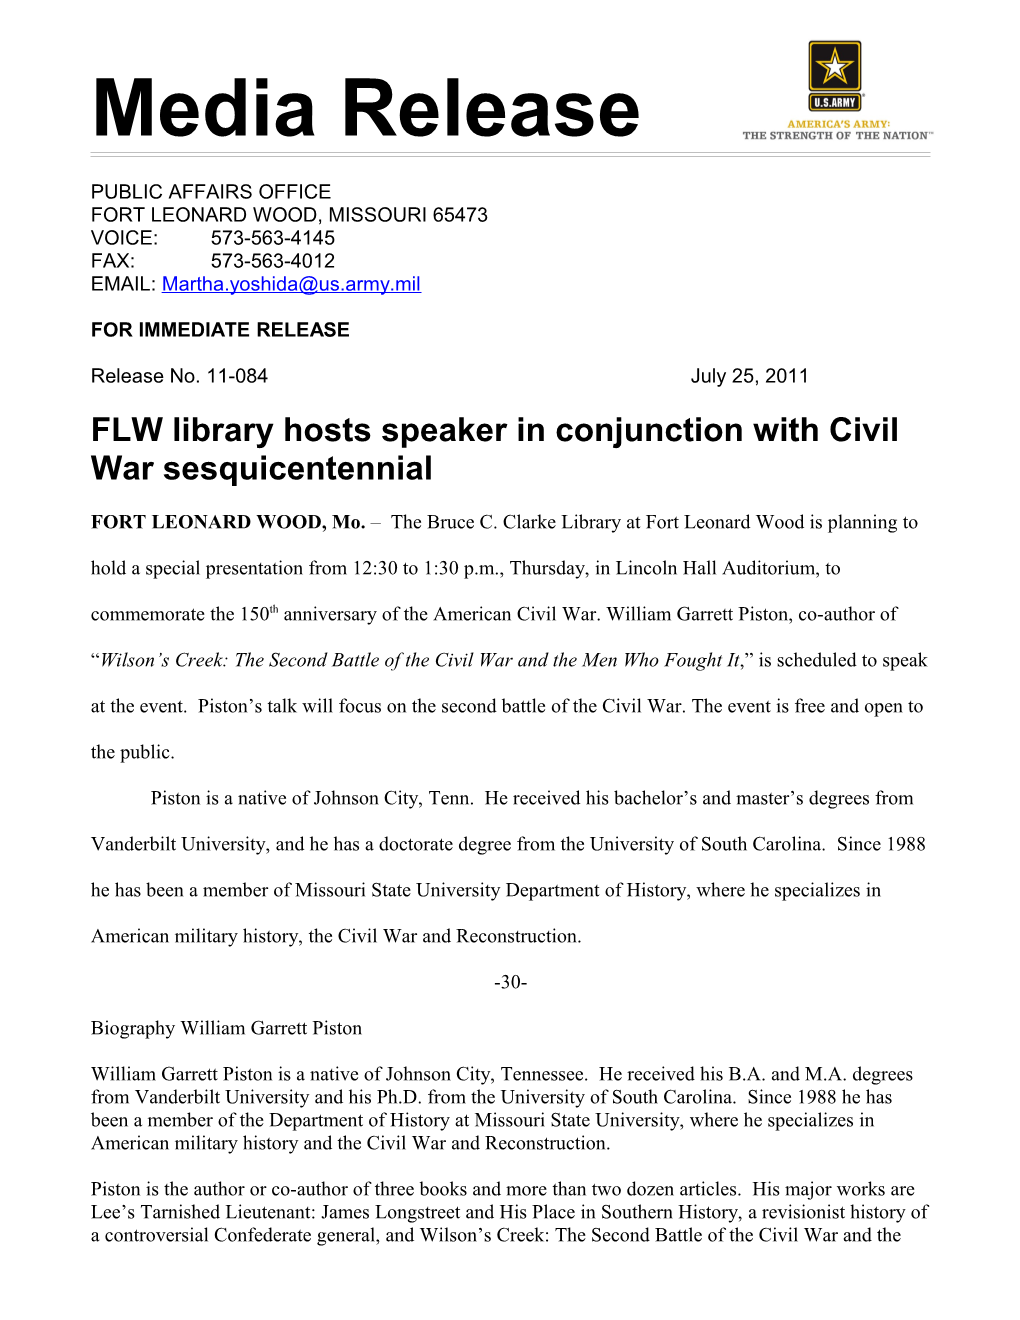 FLW Library Hosts Speaker in Conjunction with Civil War Sesquicentennial